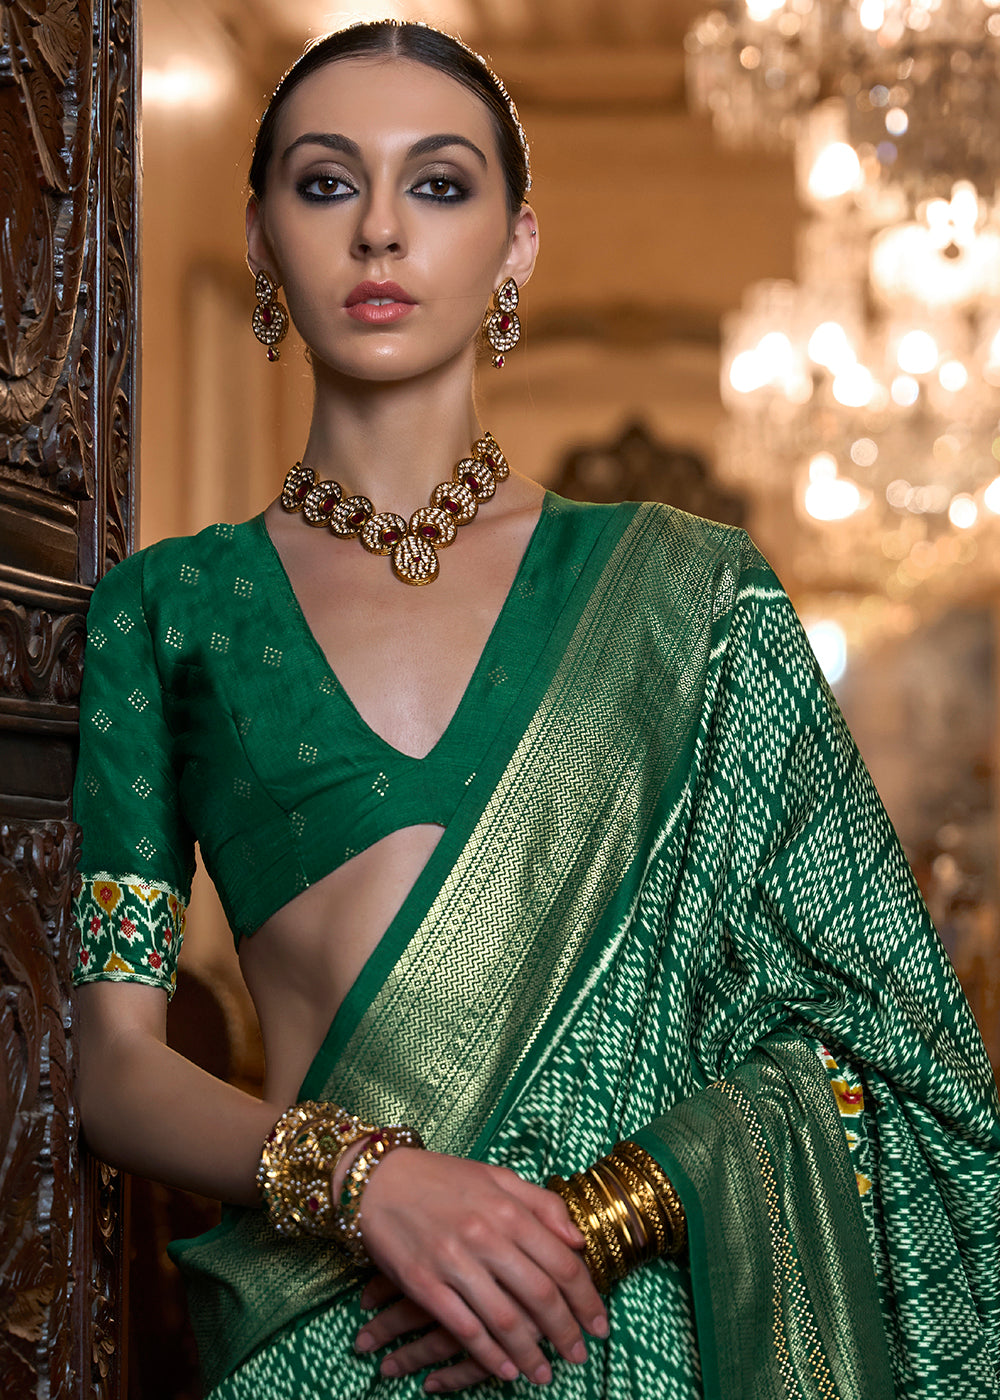 Shop Now Marvelous Green Woven Zari & Printed Patola Silk Traditional Saree from Empress Clothing in USA, UK, Canada & Worldwide.